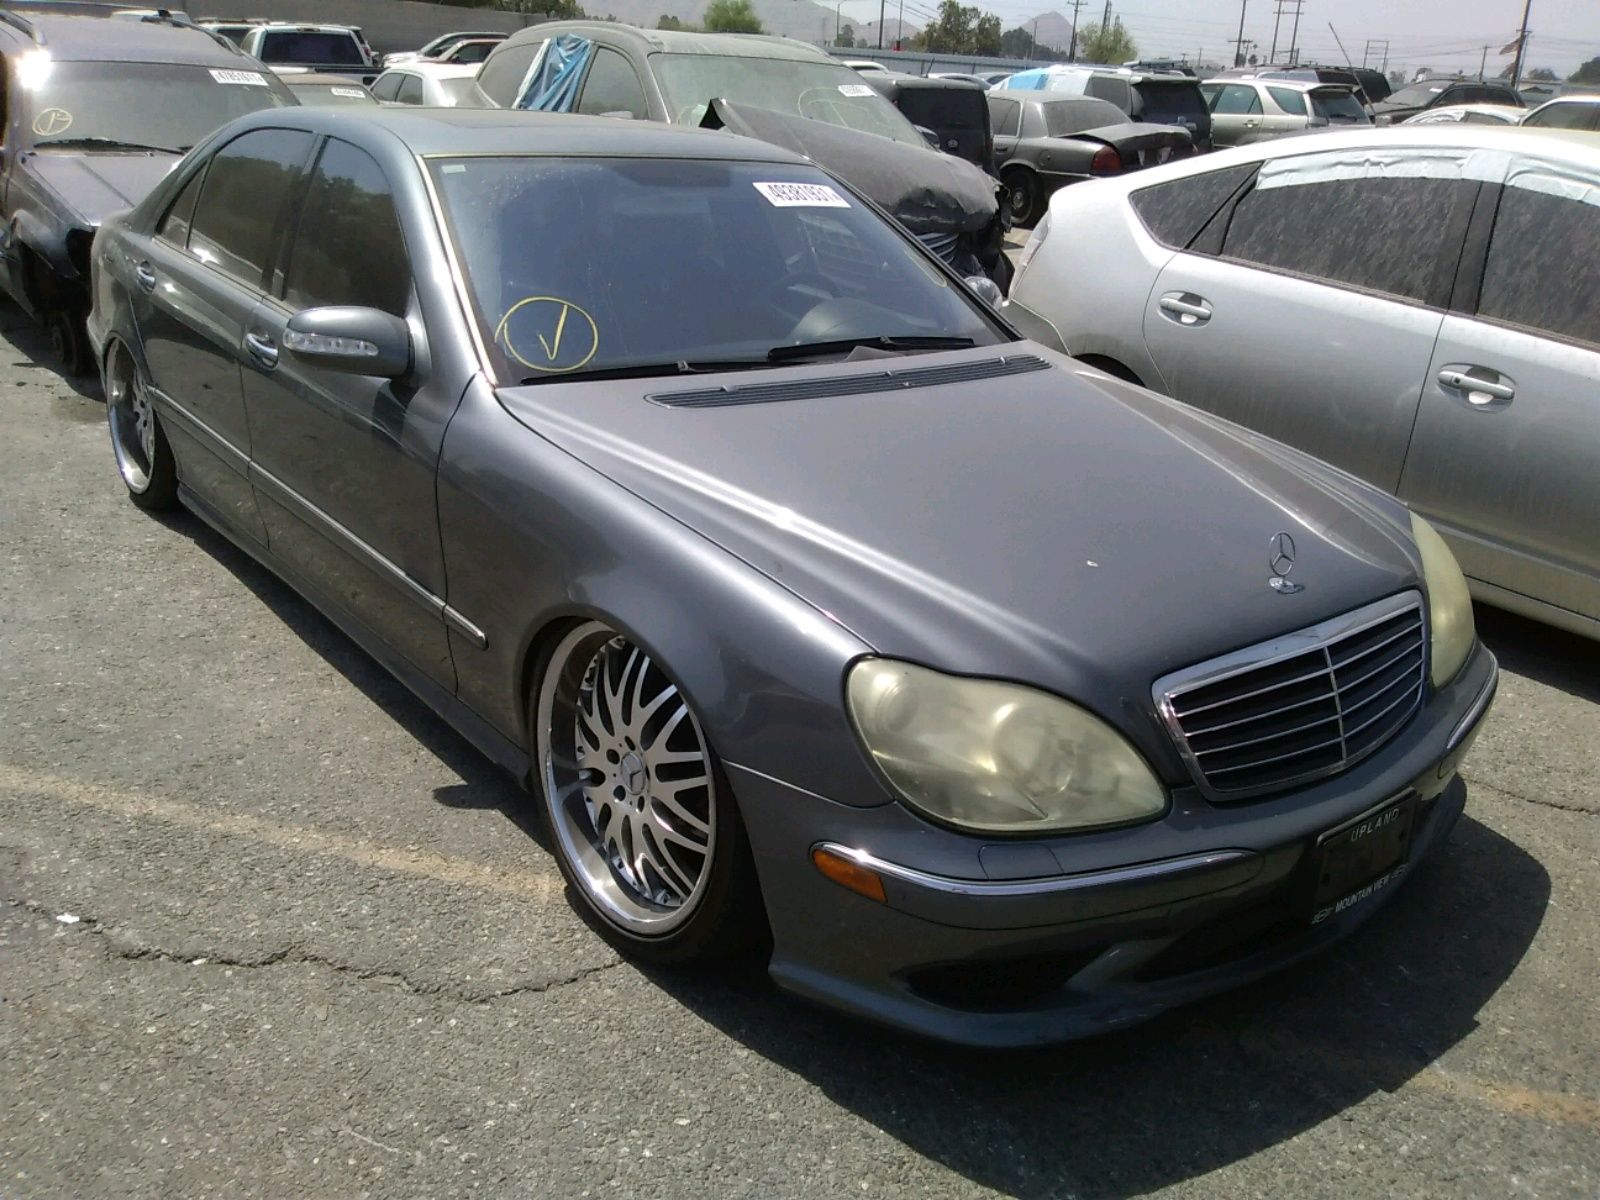 1 of WDBNG75J86A474811 Mercedes-Benz S-Class 2006